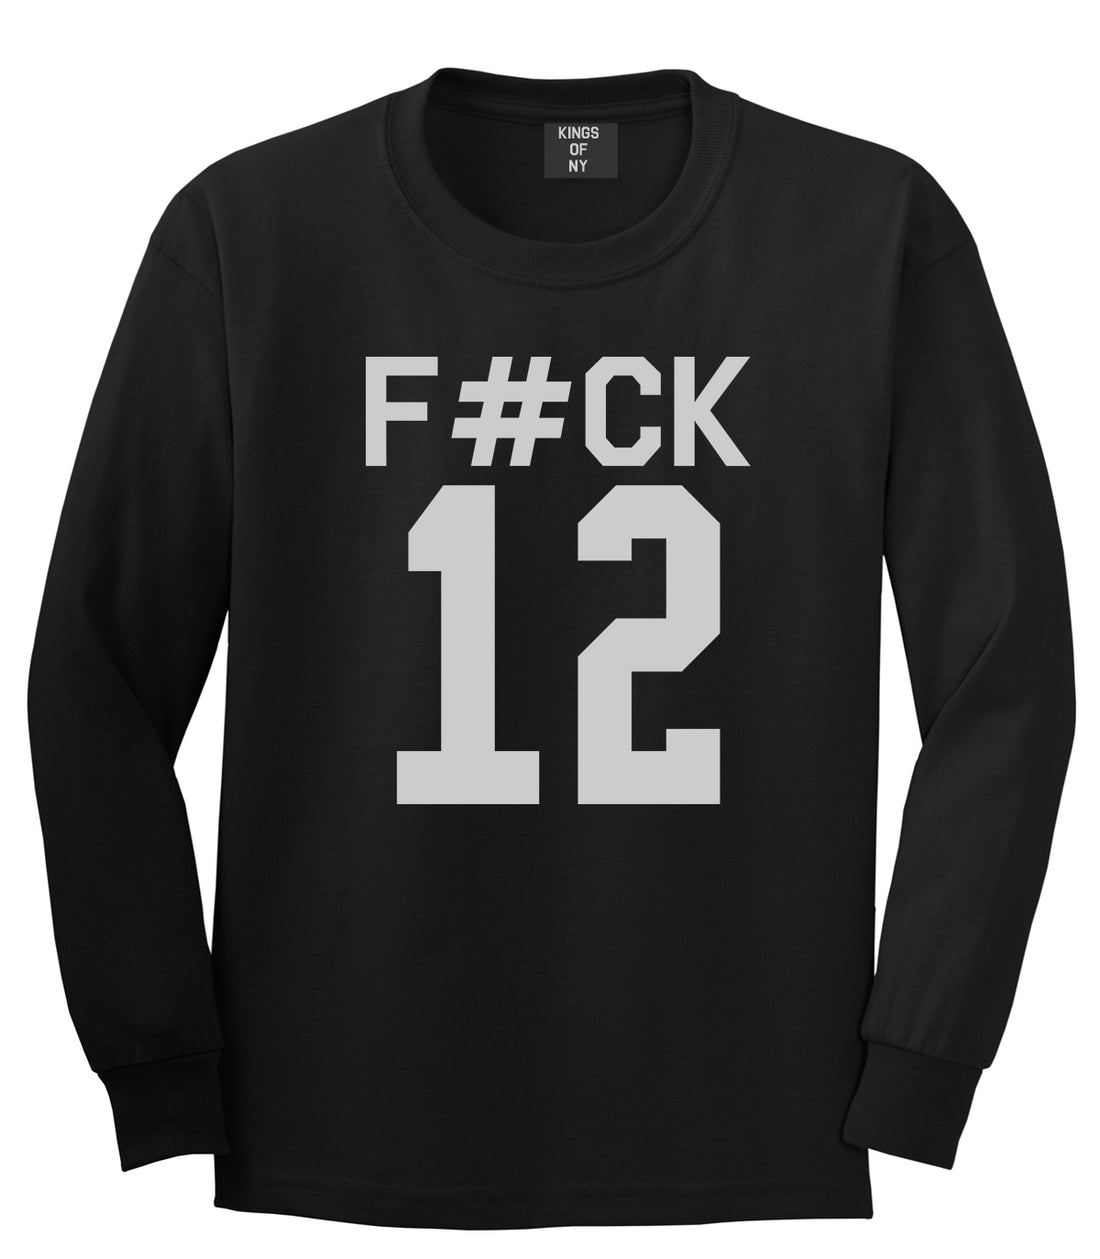 Fck 12 Police Brutality Mens Long Sleeve T-Shirt Black by Kings Of NY